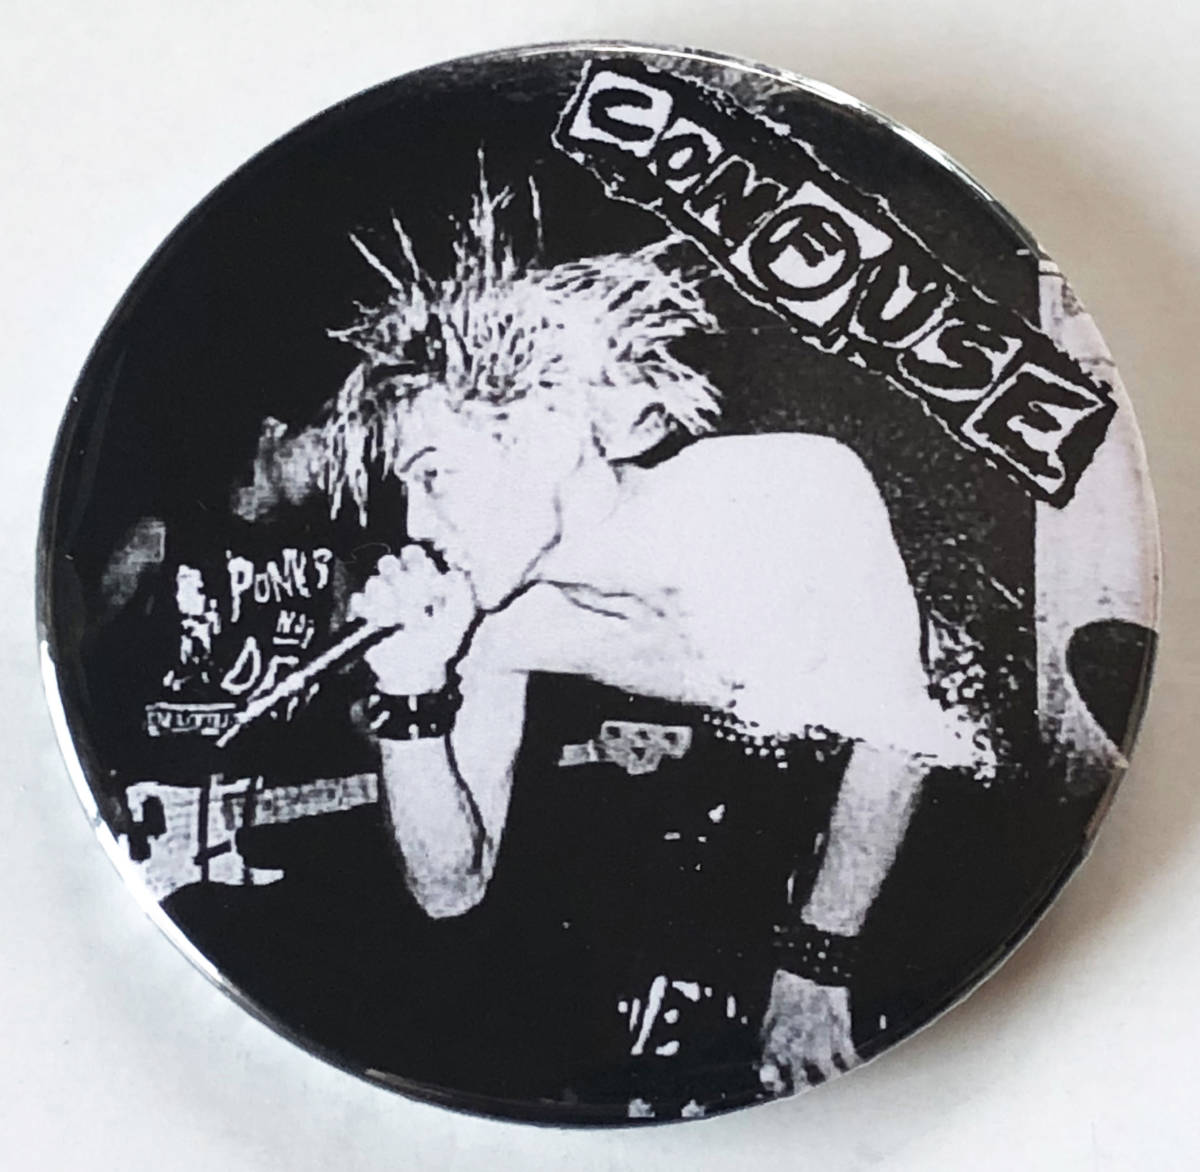 CONFUSE - Live Photo 缶バッジ 25mm #九州 #punk #80's cult killer punk rock #custom buttons_画像1